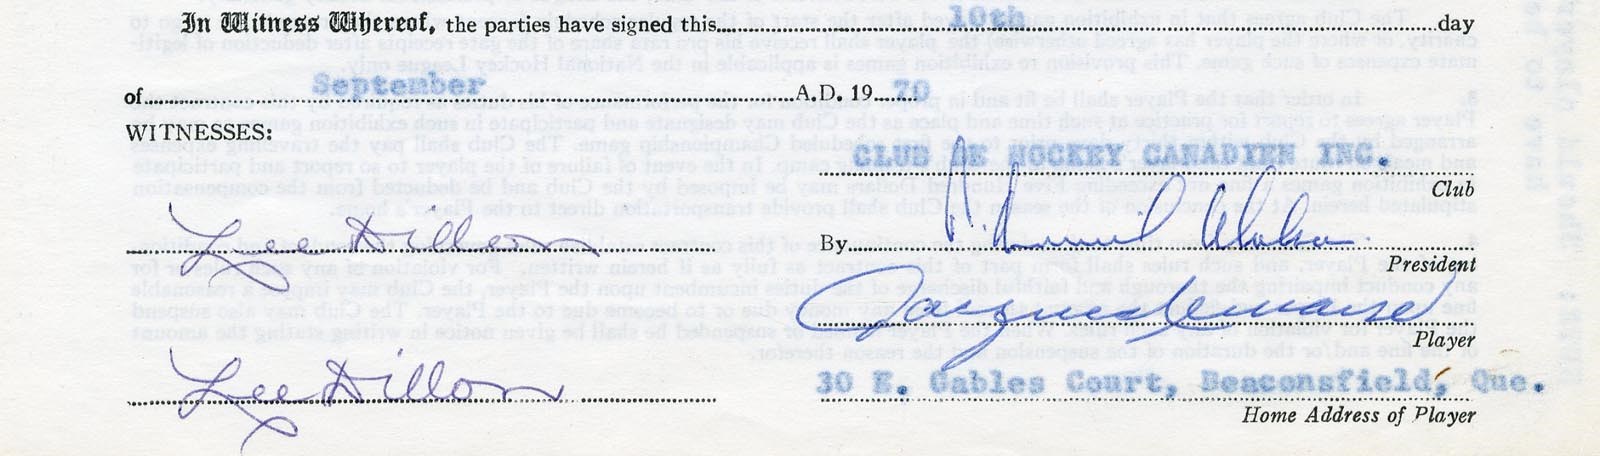 Hockey - 1970 Jacques Lemaire Montreal Canadiens Player Contract